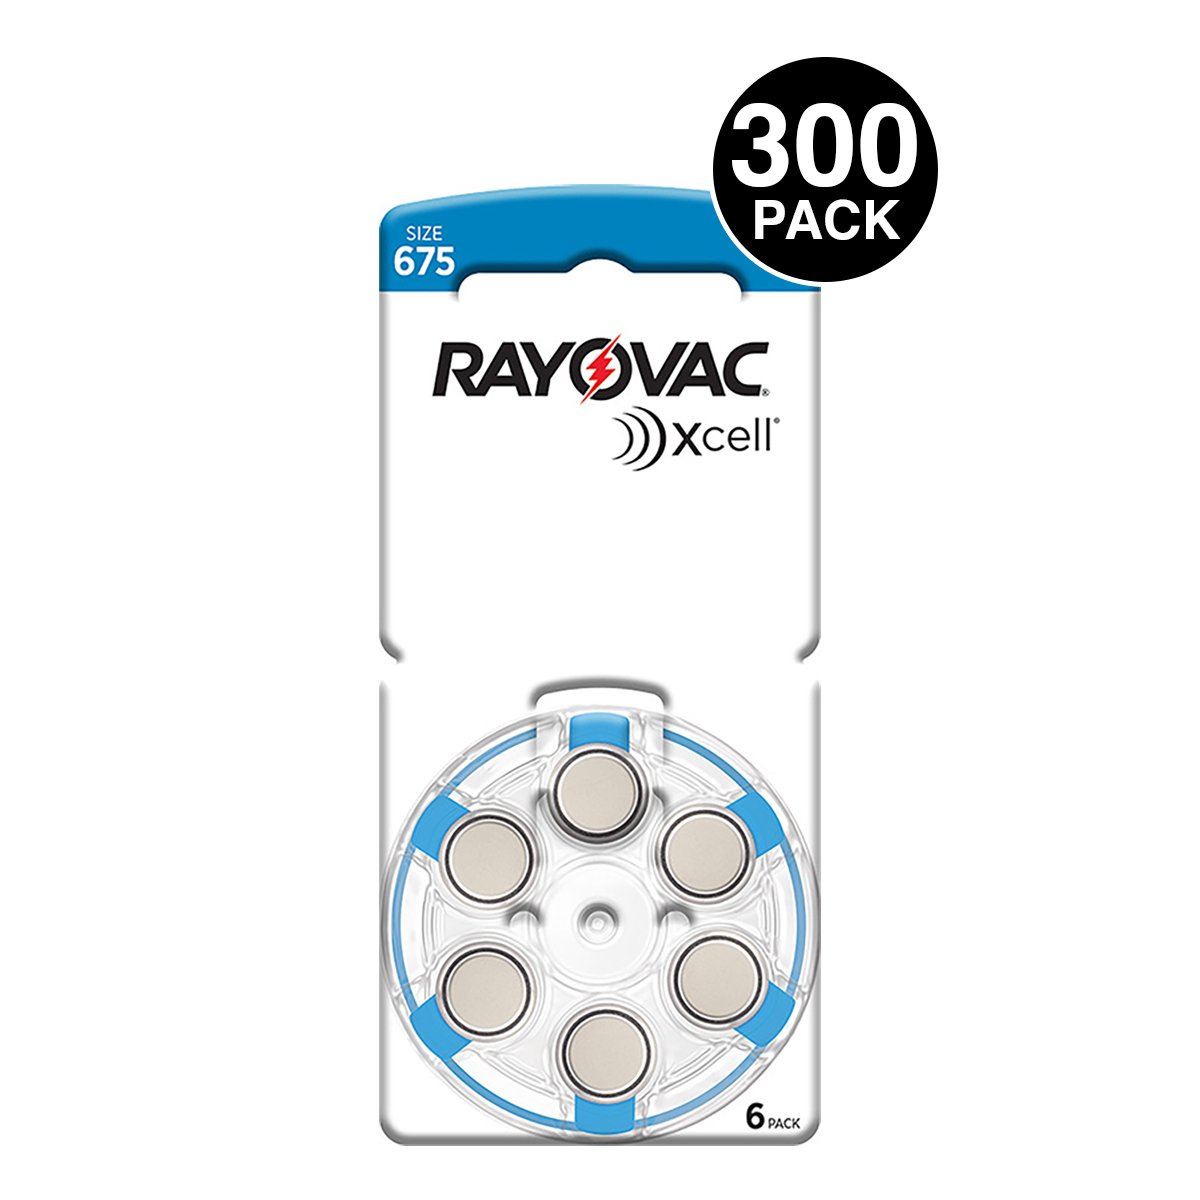 Xcell (Made By Rayovac) Size 675 Hearing Aid Batteries (300 Pcs) 